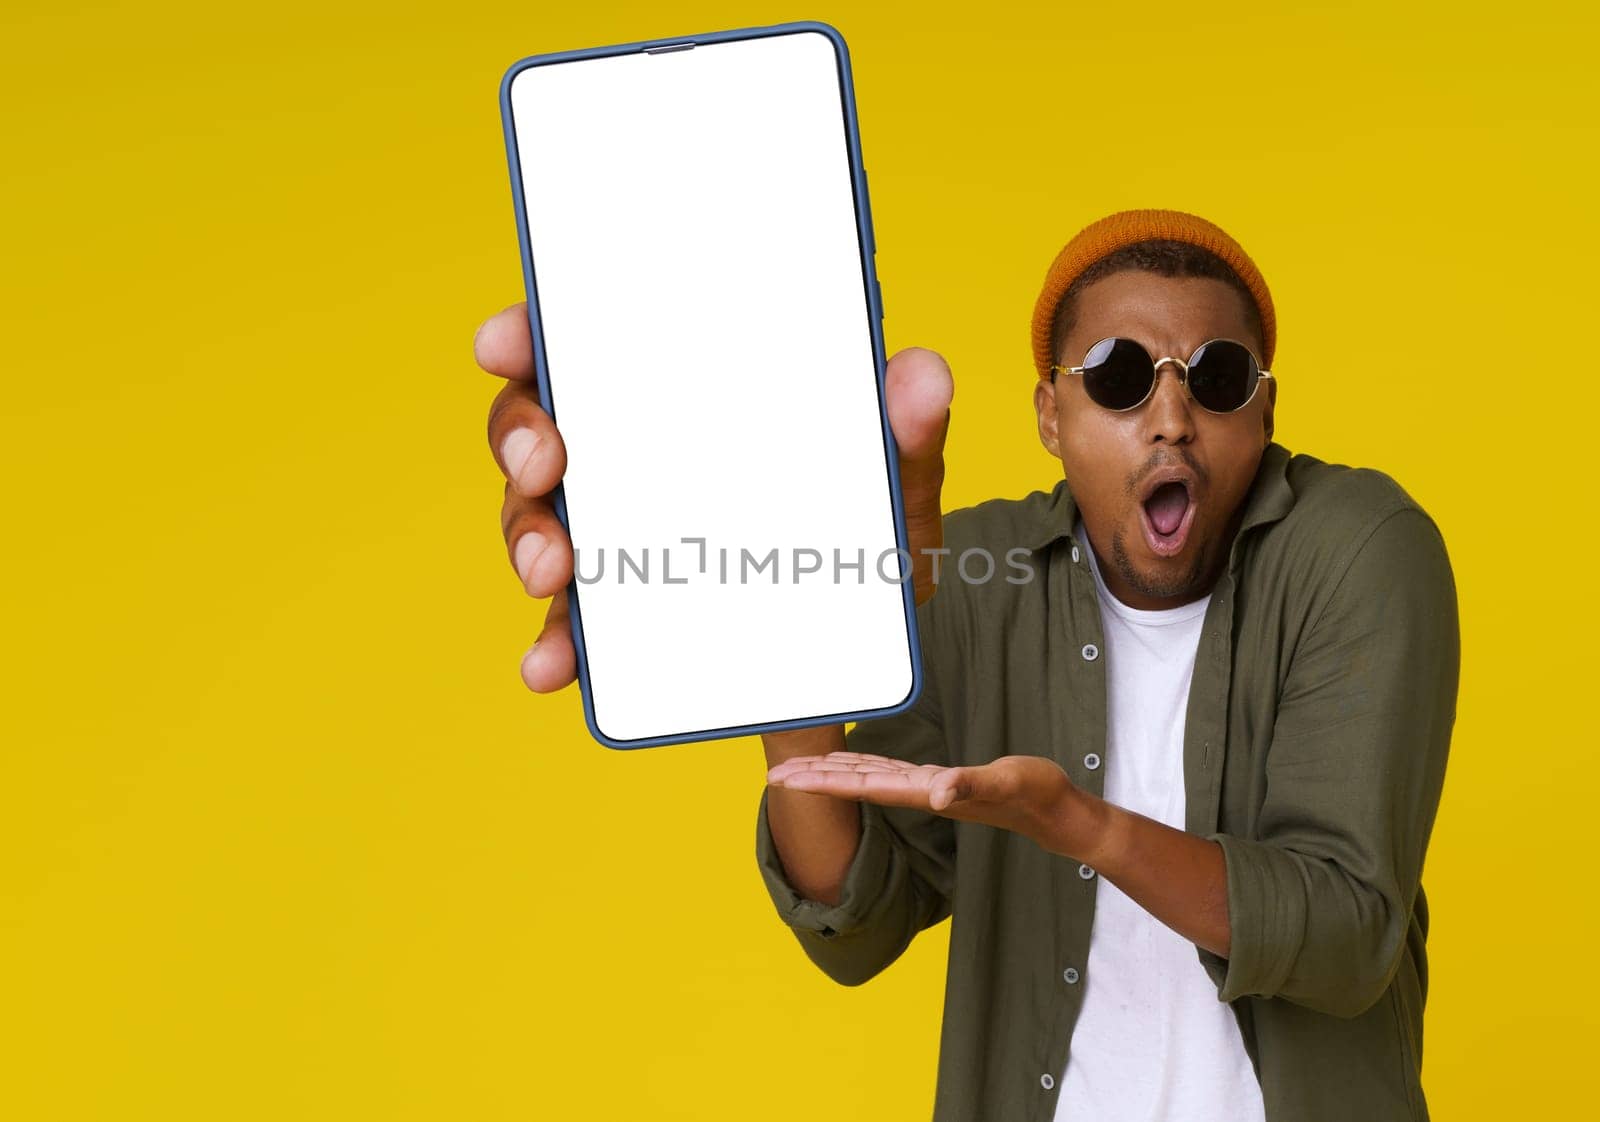 Surprised African man is holding phone with white blank screen against yellow background with copy space. The image is ideal for advertising concepts. by LipikStockMedia